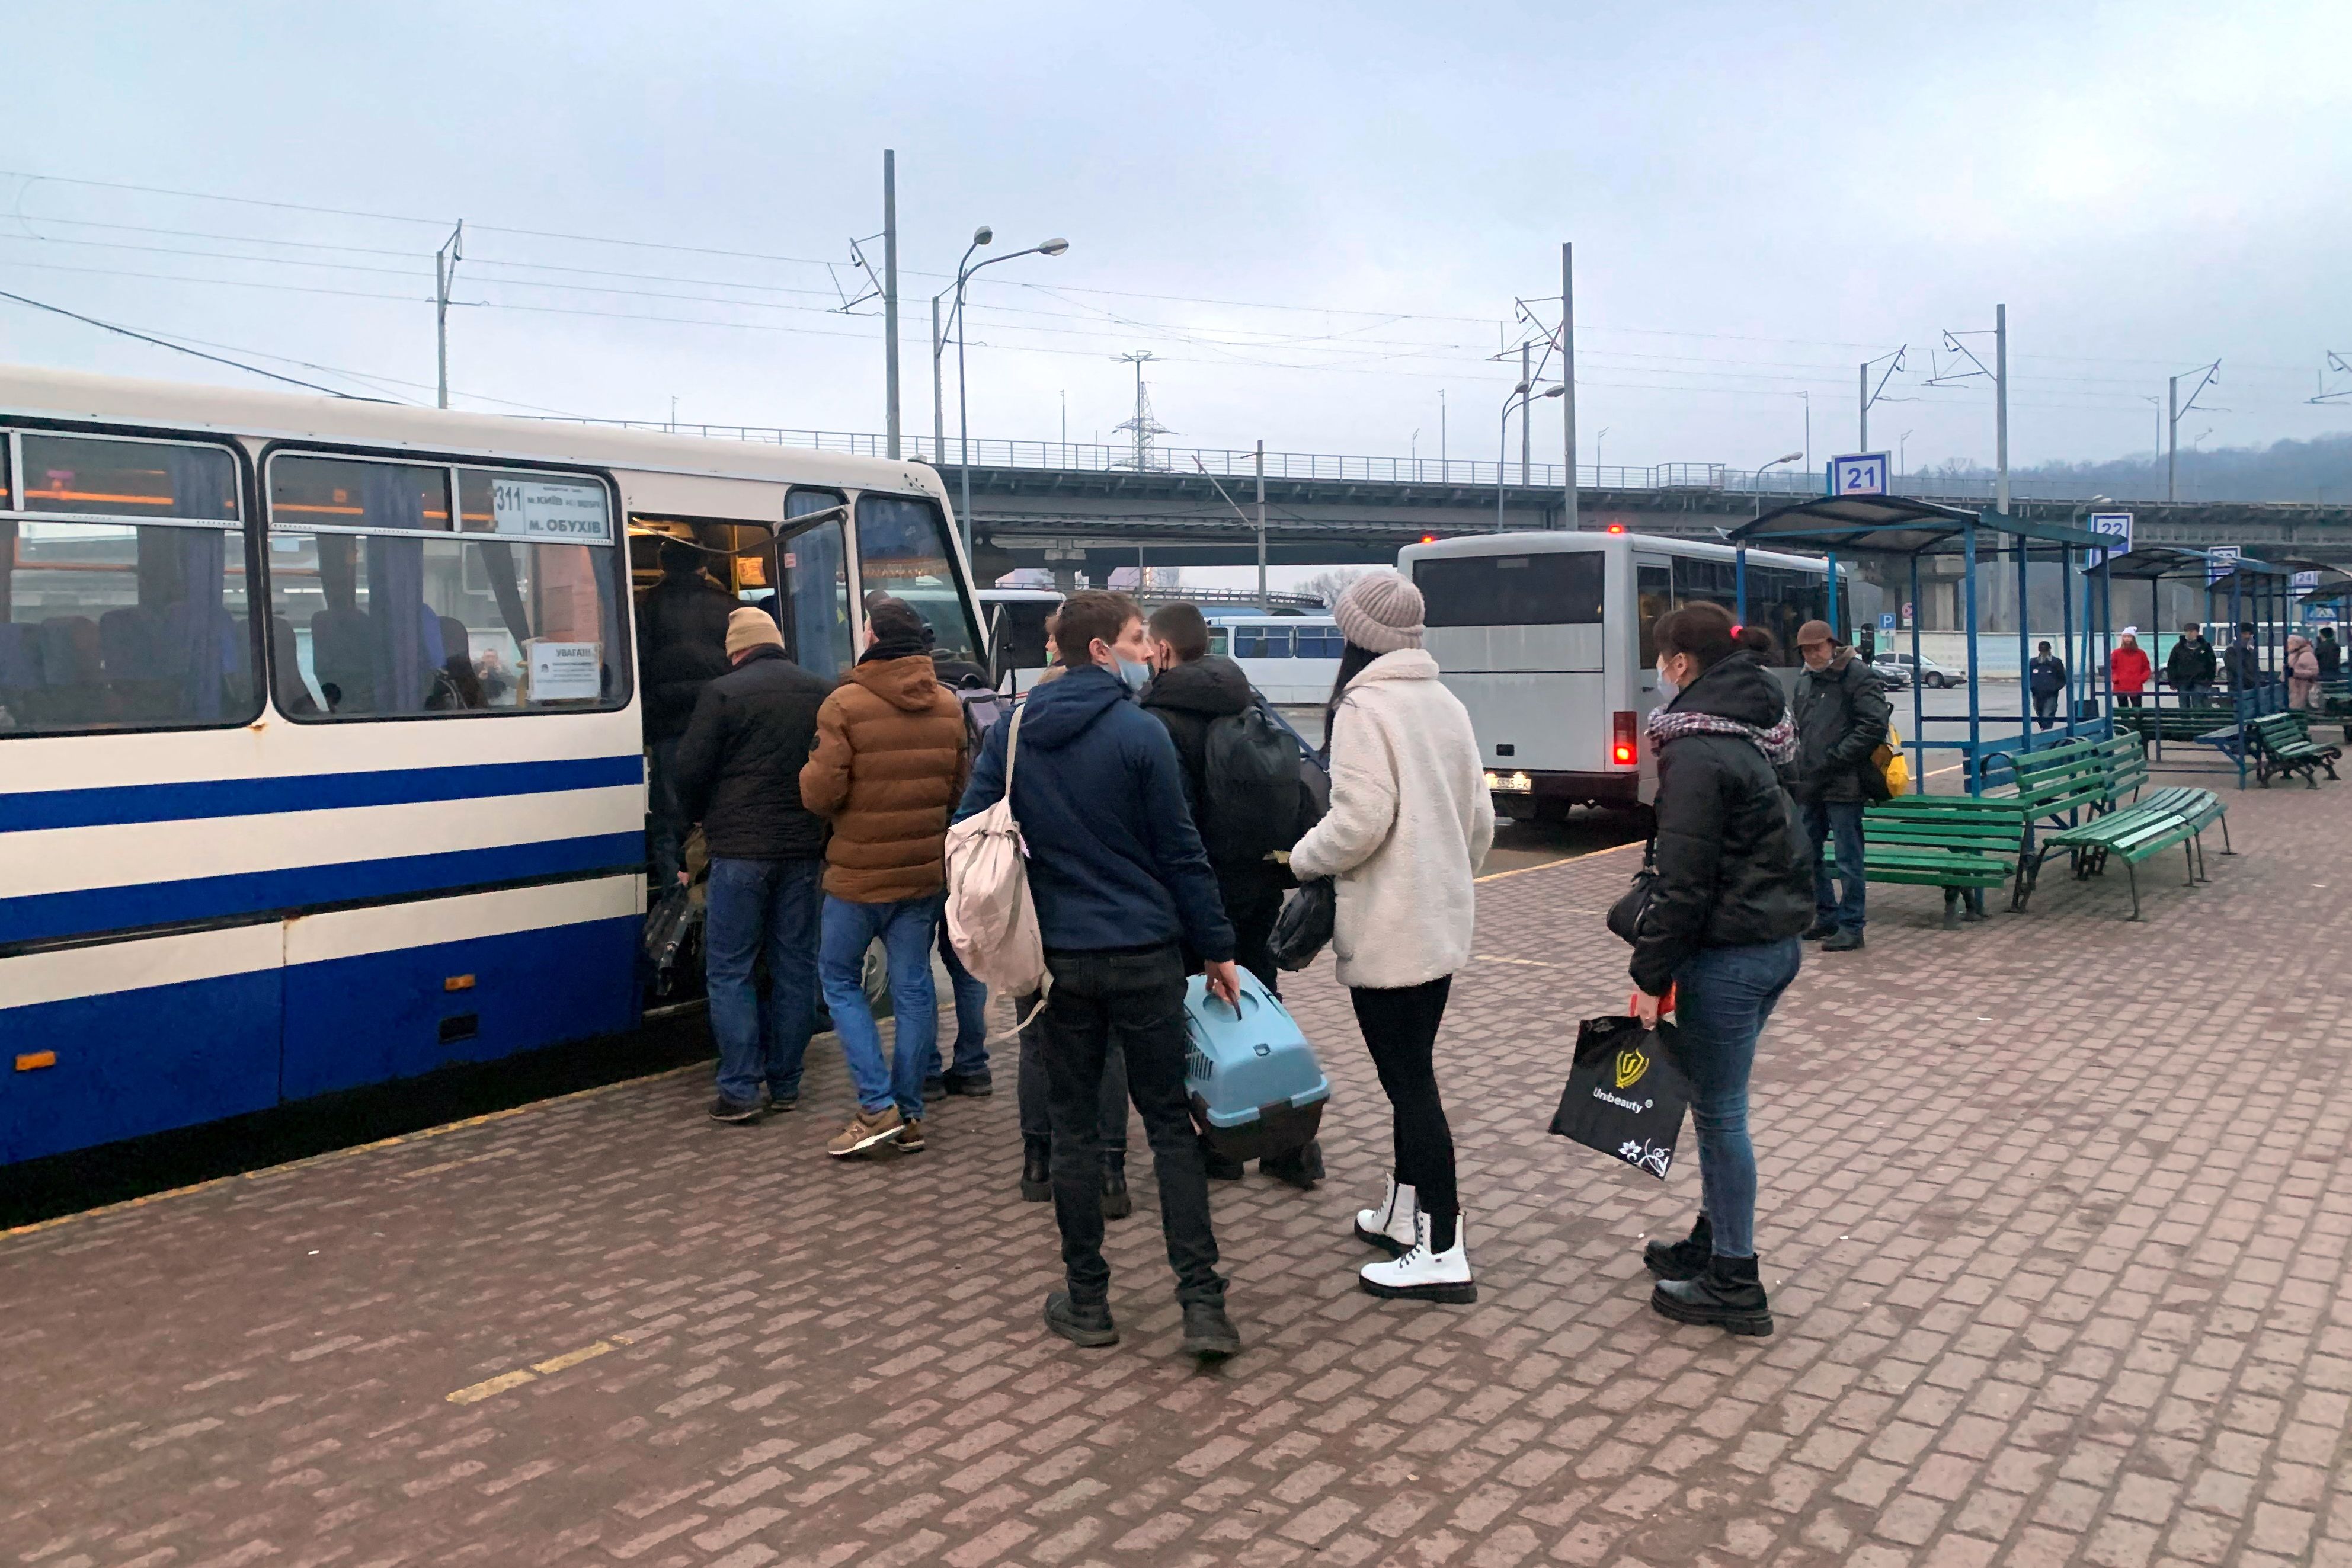 People board a bus at the Vydubytchi bus station in Kyiv in the morning of February 24, 2022. Russian President Vladimir Putin announced a military operation in Ukraine on Thursday with explosions heard soon after across the country and its foreign minister warning a 